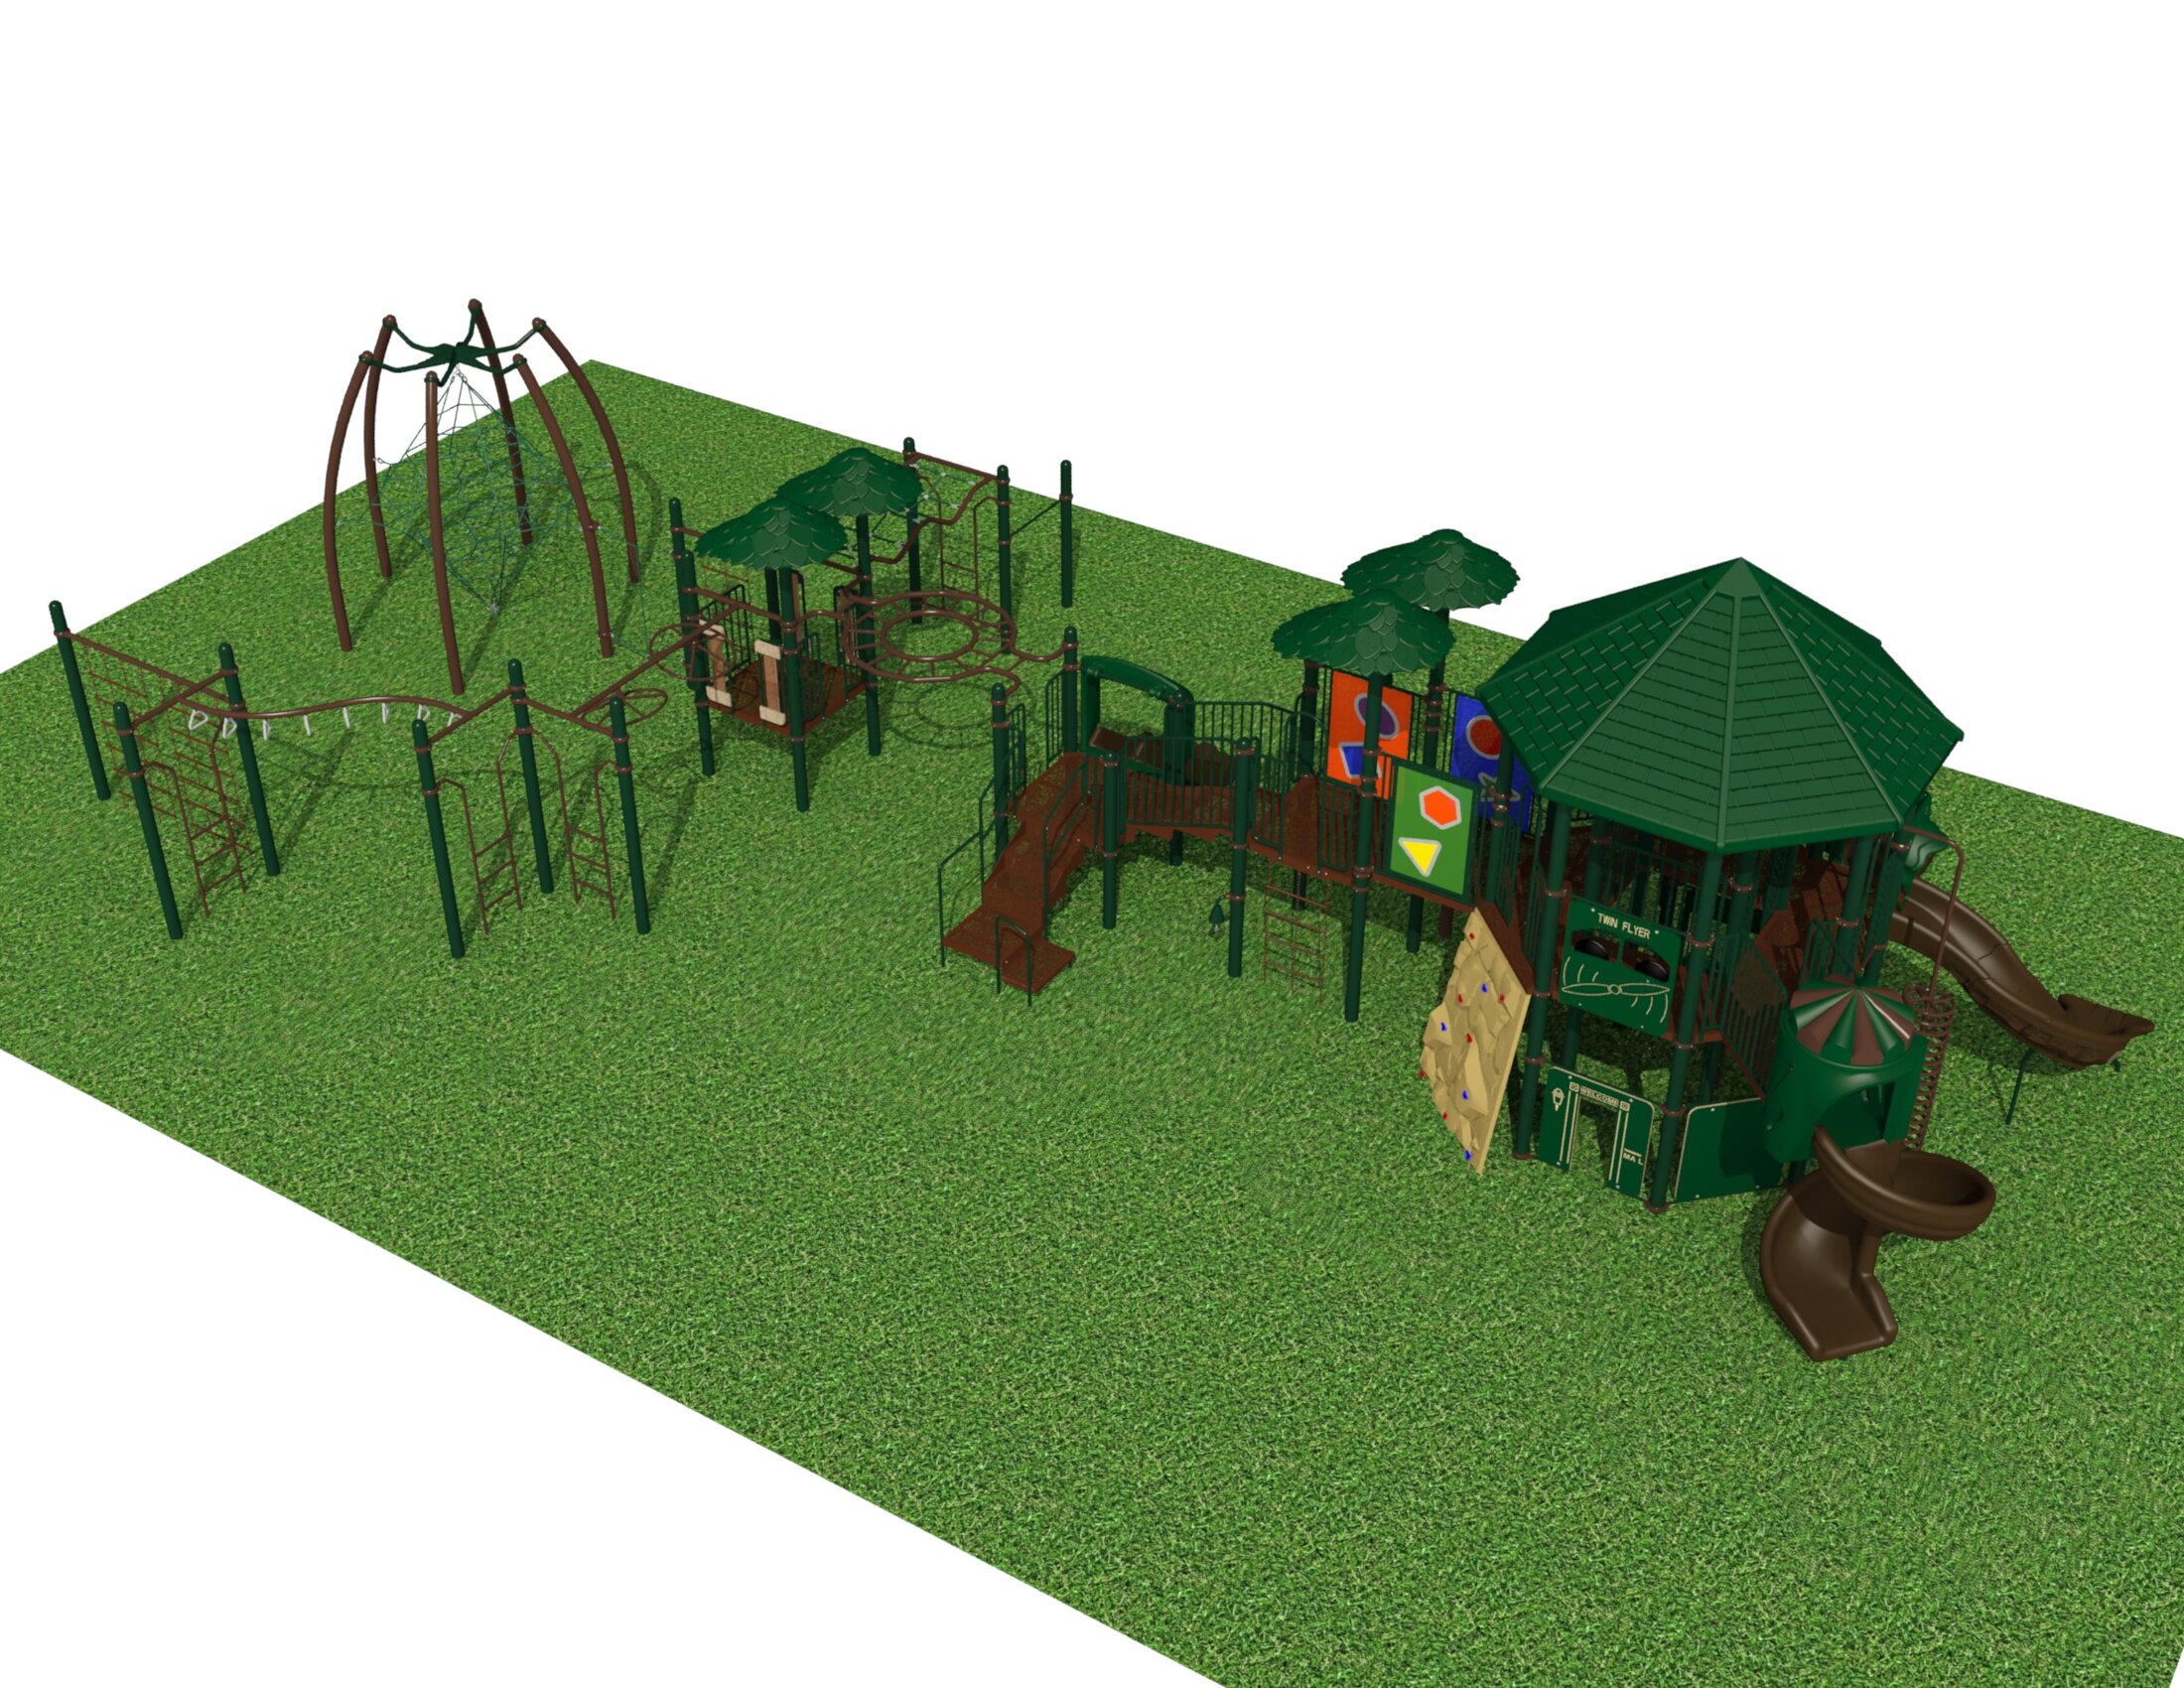 Rendering of the large playground structure